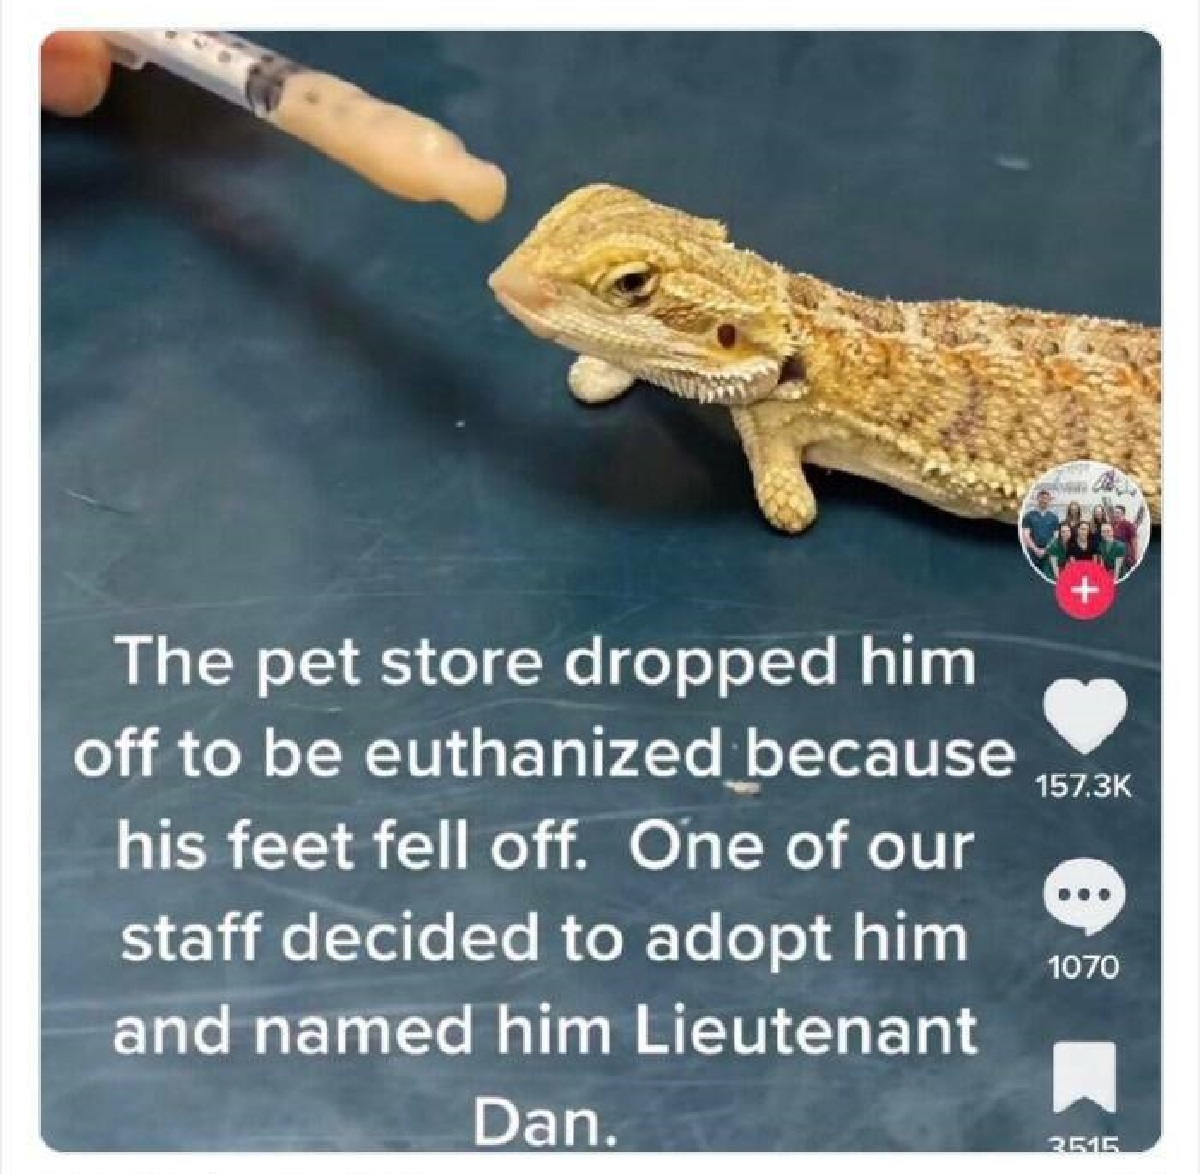 Pet store - The pet store dropped him off to be euthanized because his feet fell off. One of our staff decided to adopt him and named him Lieutenant Dan. 1070 3515